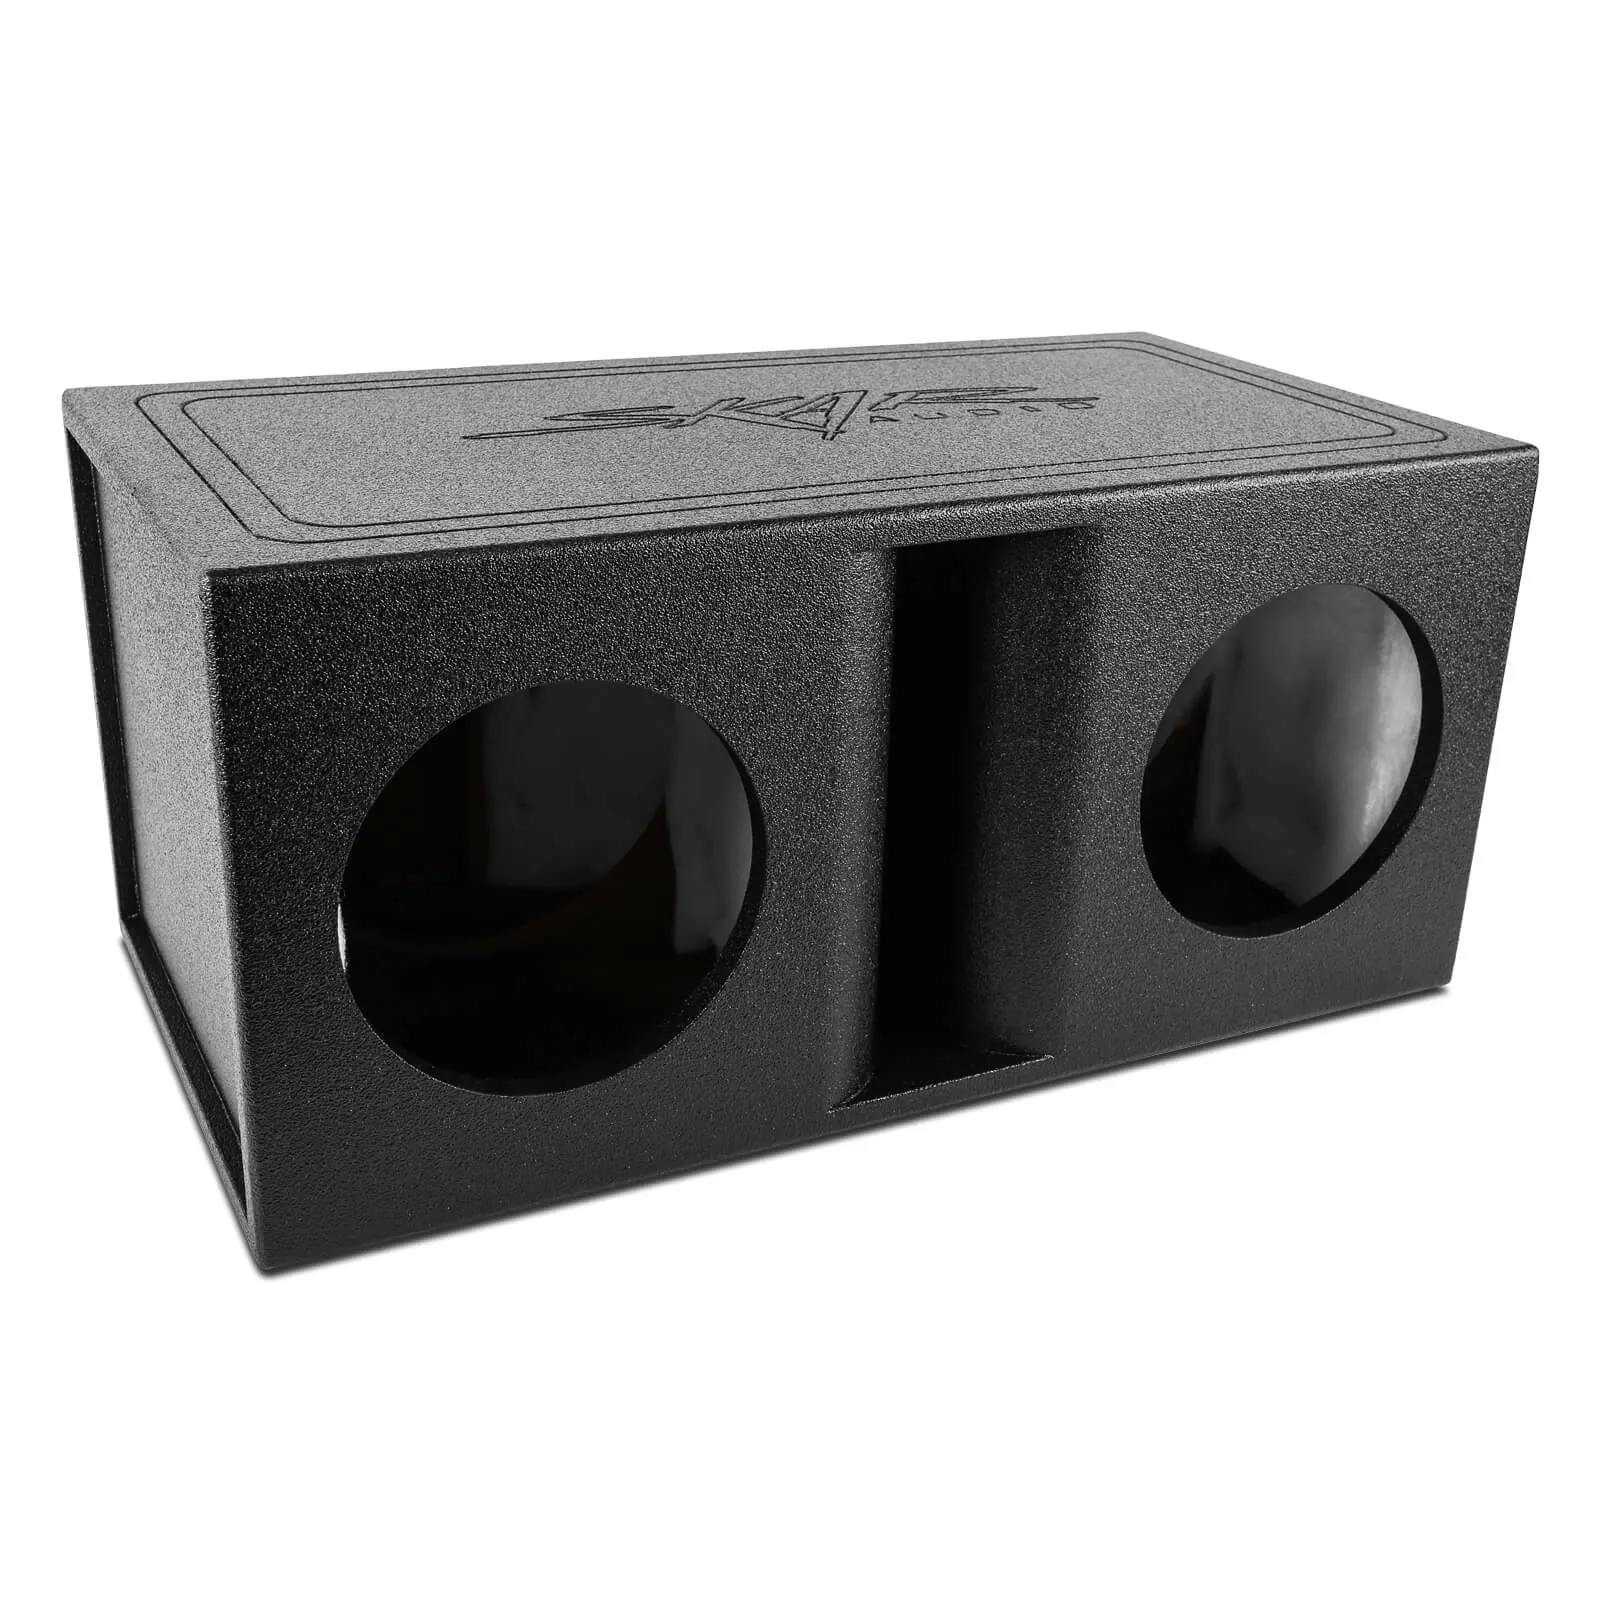 Featured Product Photo for Dual 8" Armor Coated Ported Subwoofer Enclosure